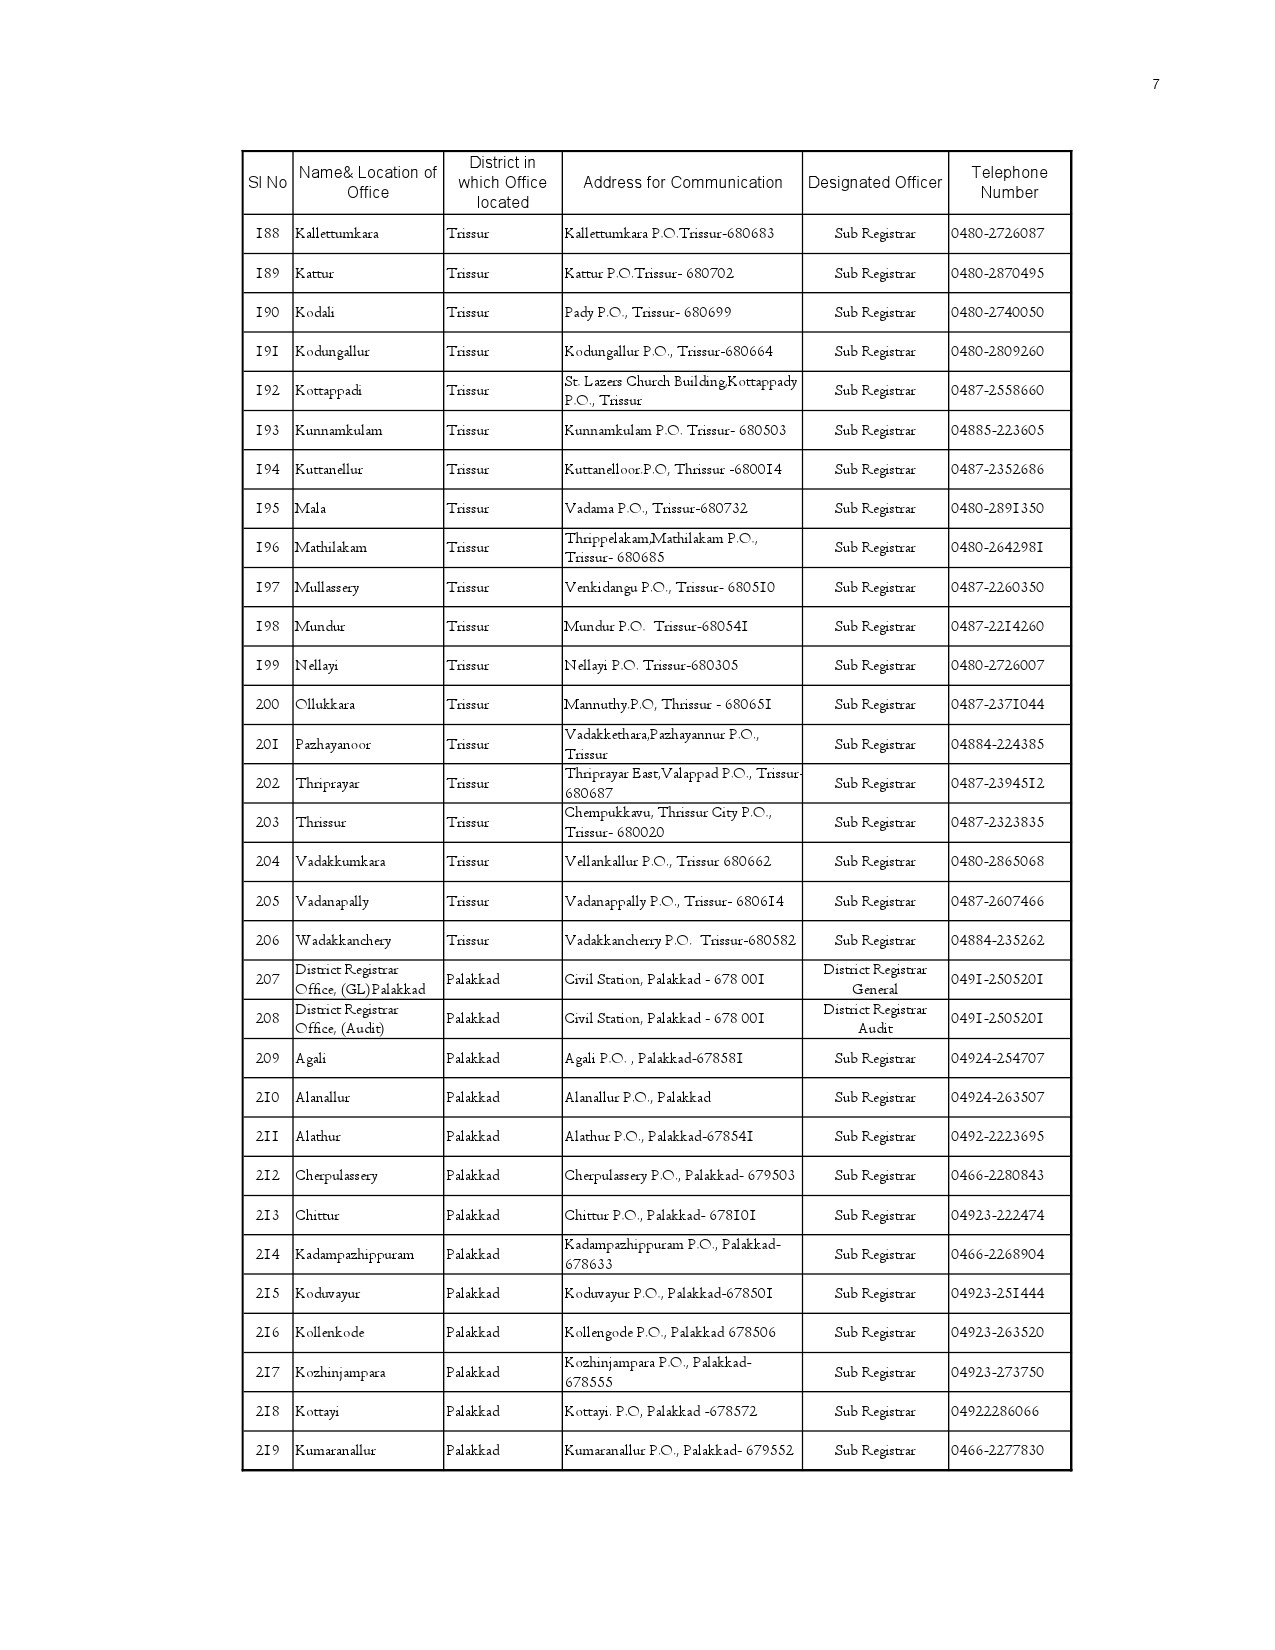 List of Offices in Kerala under the Department of Registration - Notification Image 7